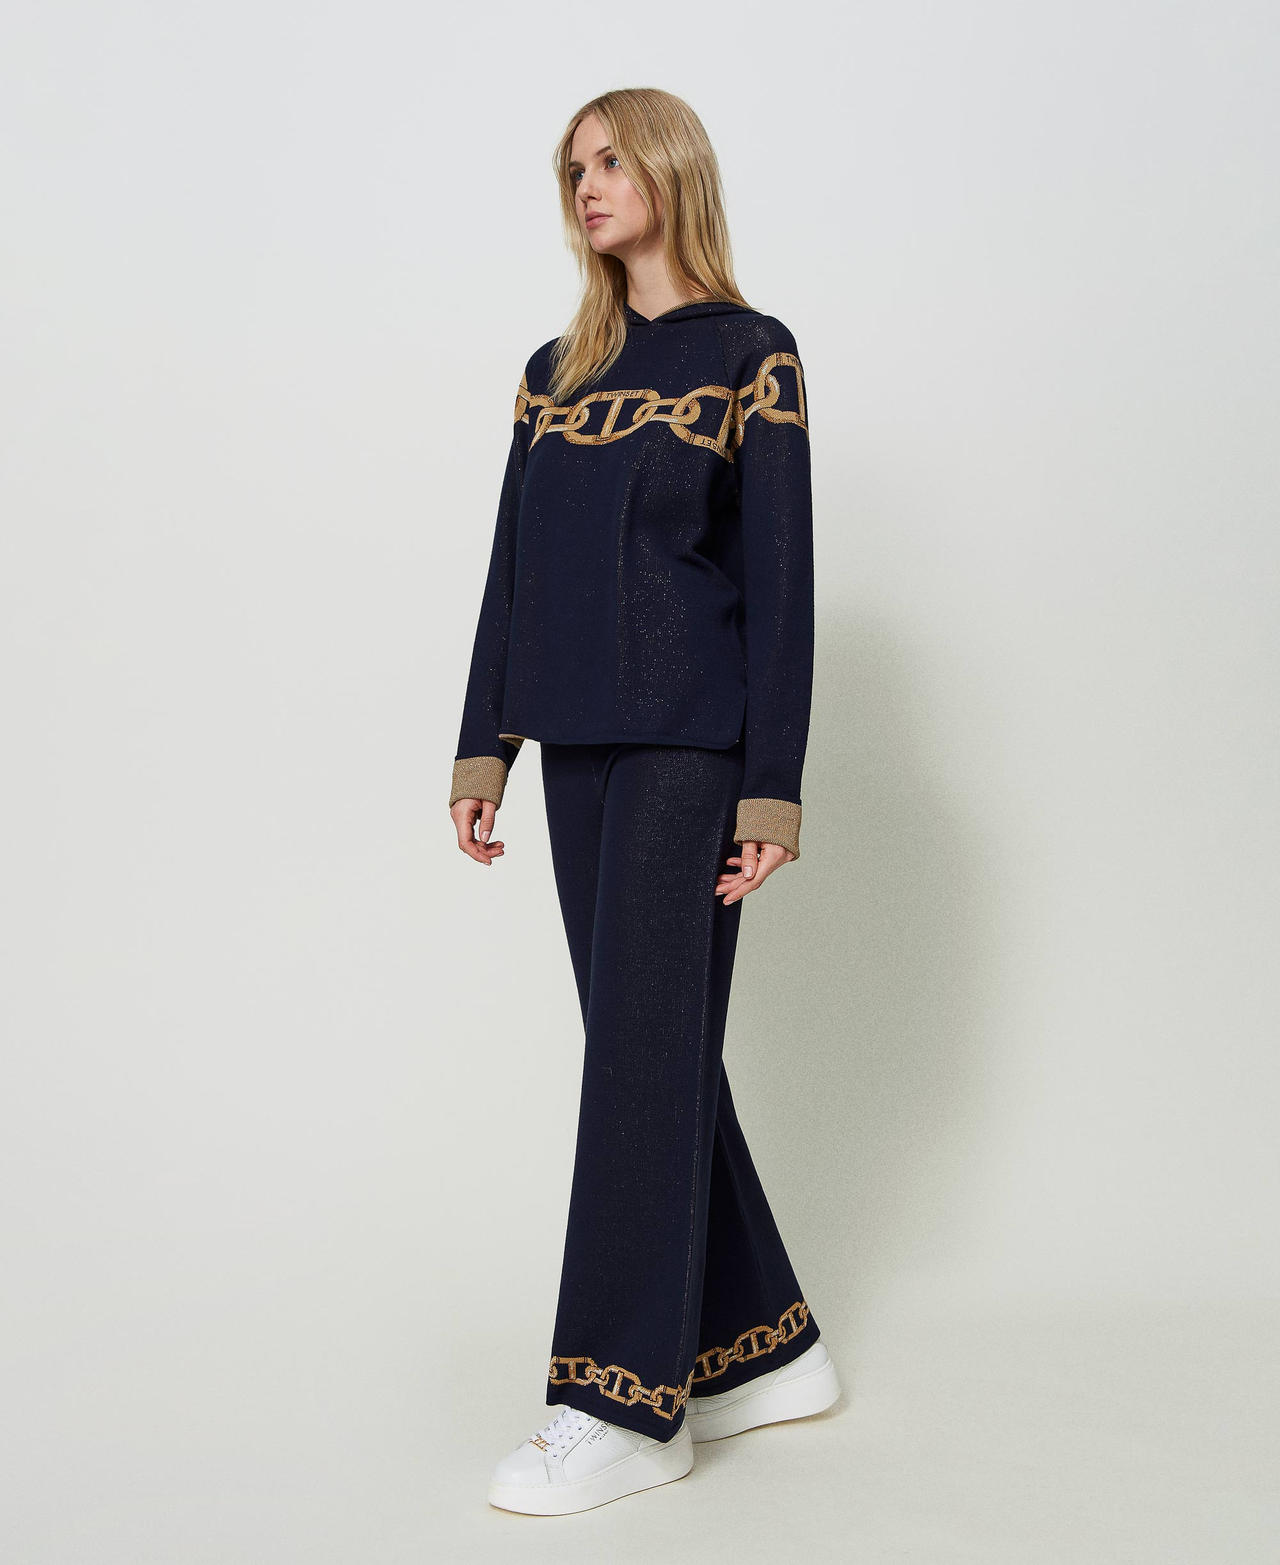 Jacquard knit trousers with chains Mid Blue and Lurex Chains Jacquard Woman 241TP3521-02